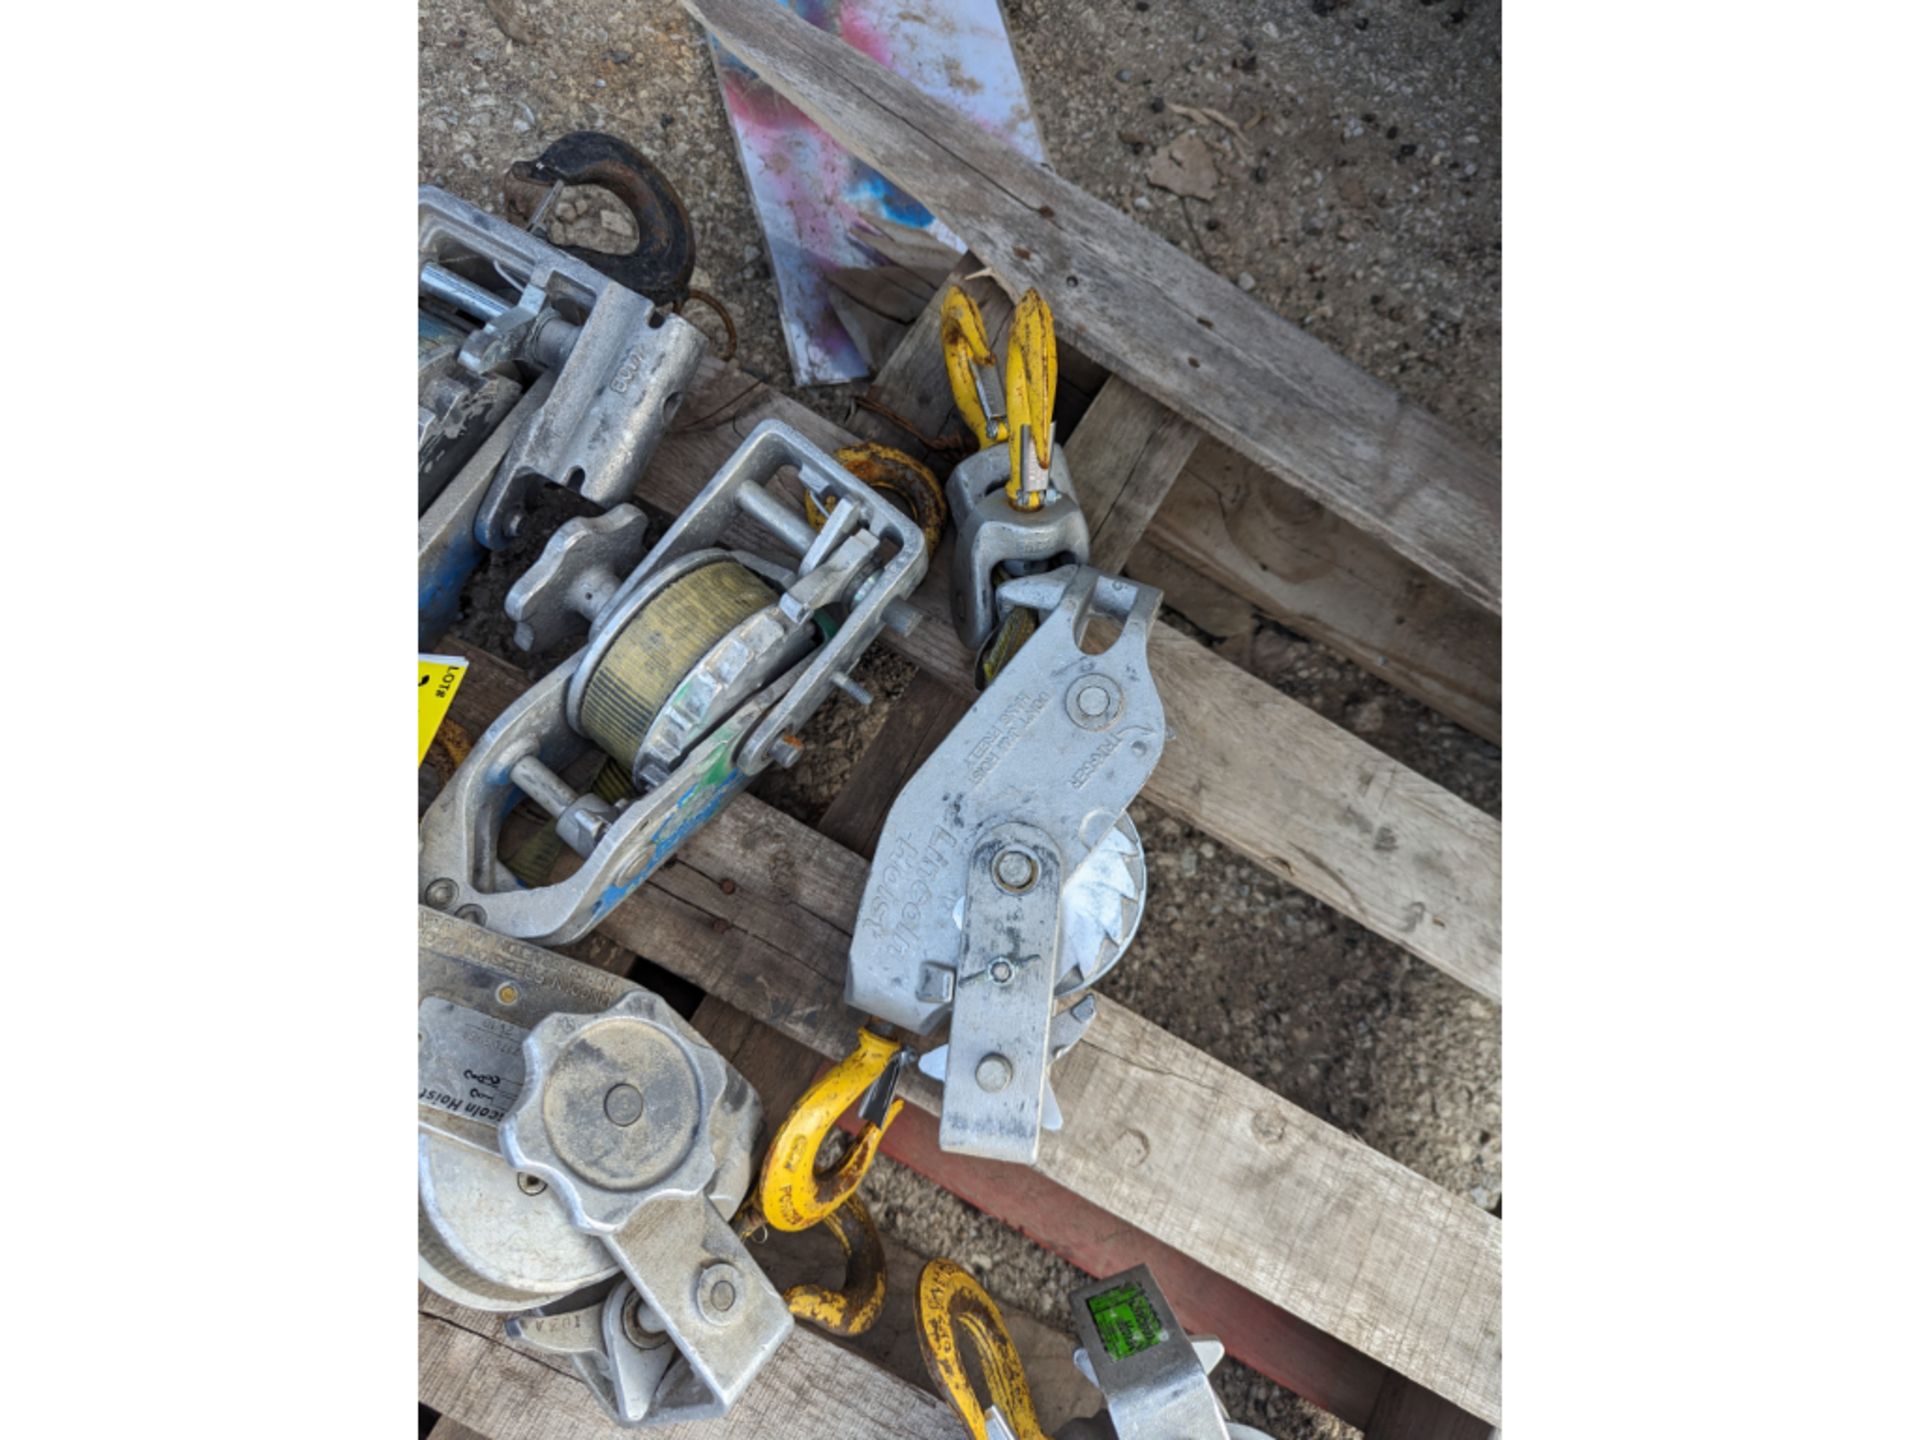 (7) LINCOLN 2W10 WEB HOIST RATCHET WINCH STRAP PULLER ELECTRIC UTILITY INDUSTRY 1000-2000LB SURPLUS - Image 5 of 7